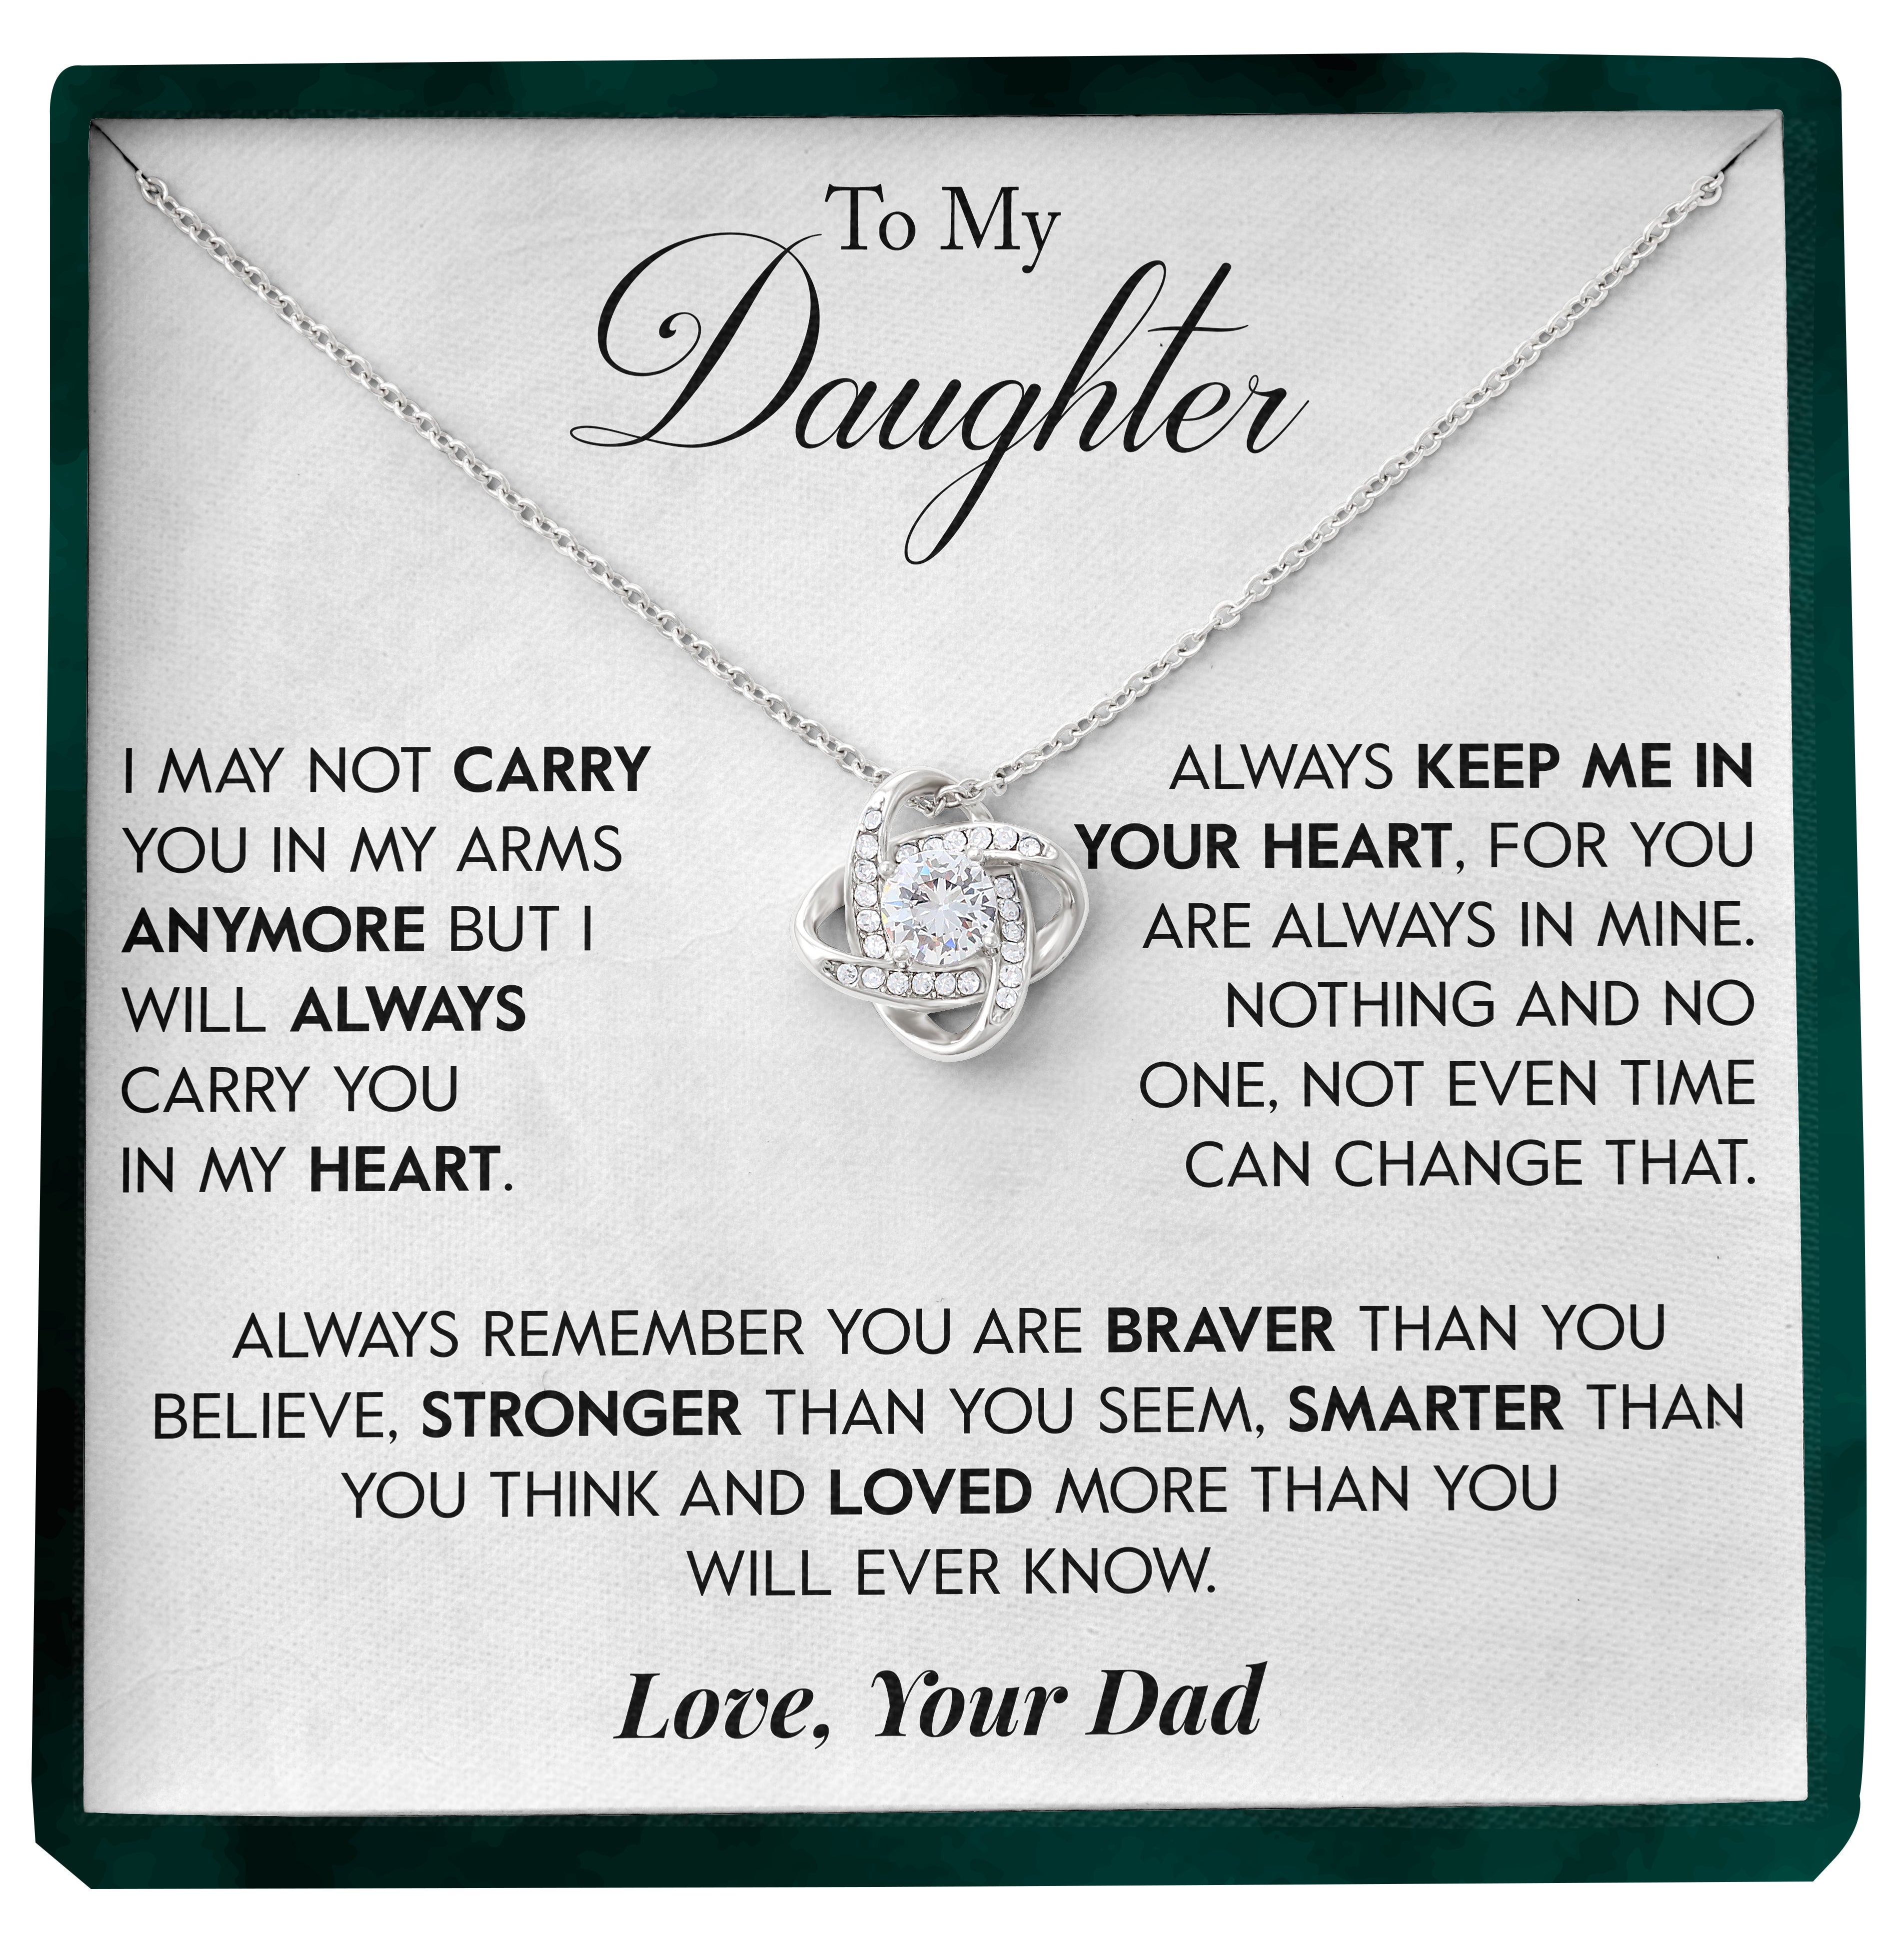 To My Daughter | "In My Heart" | Love Knot Necklace